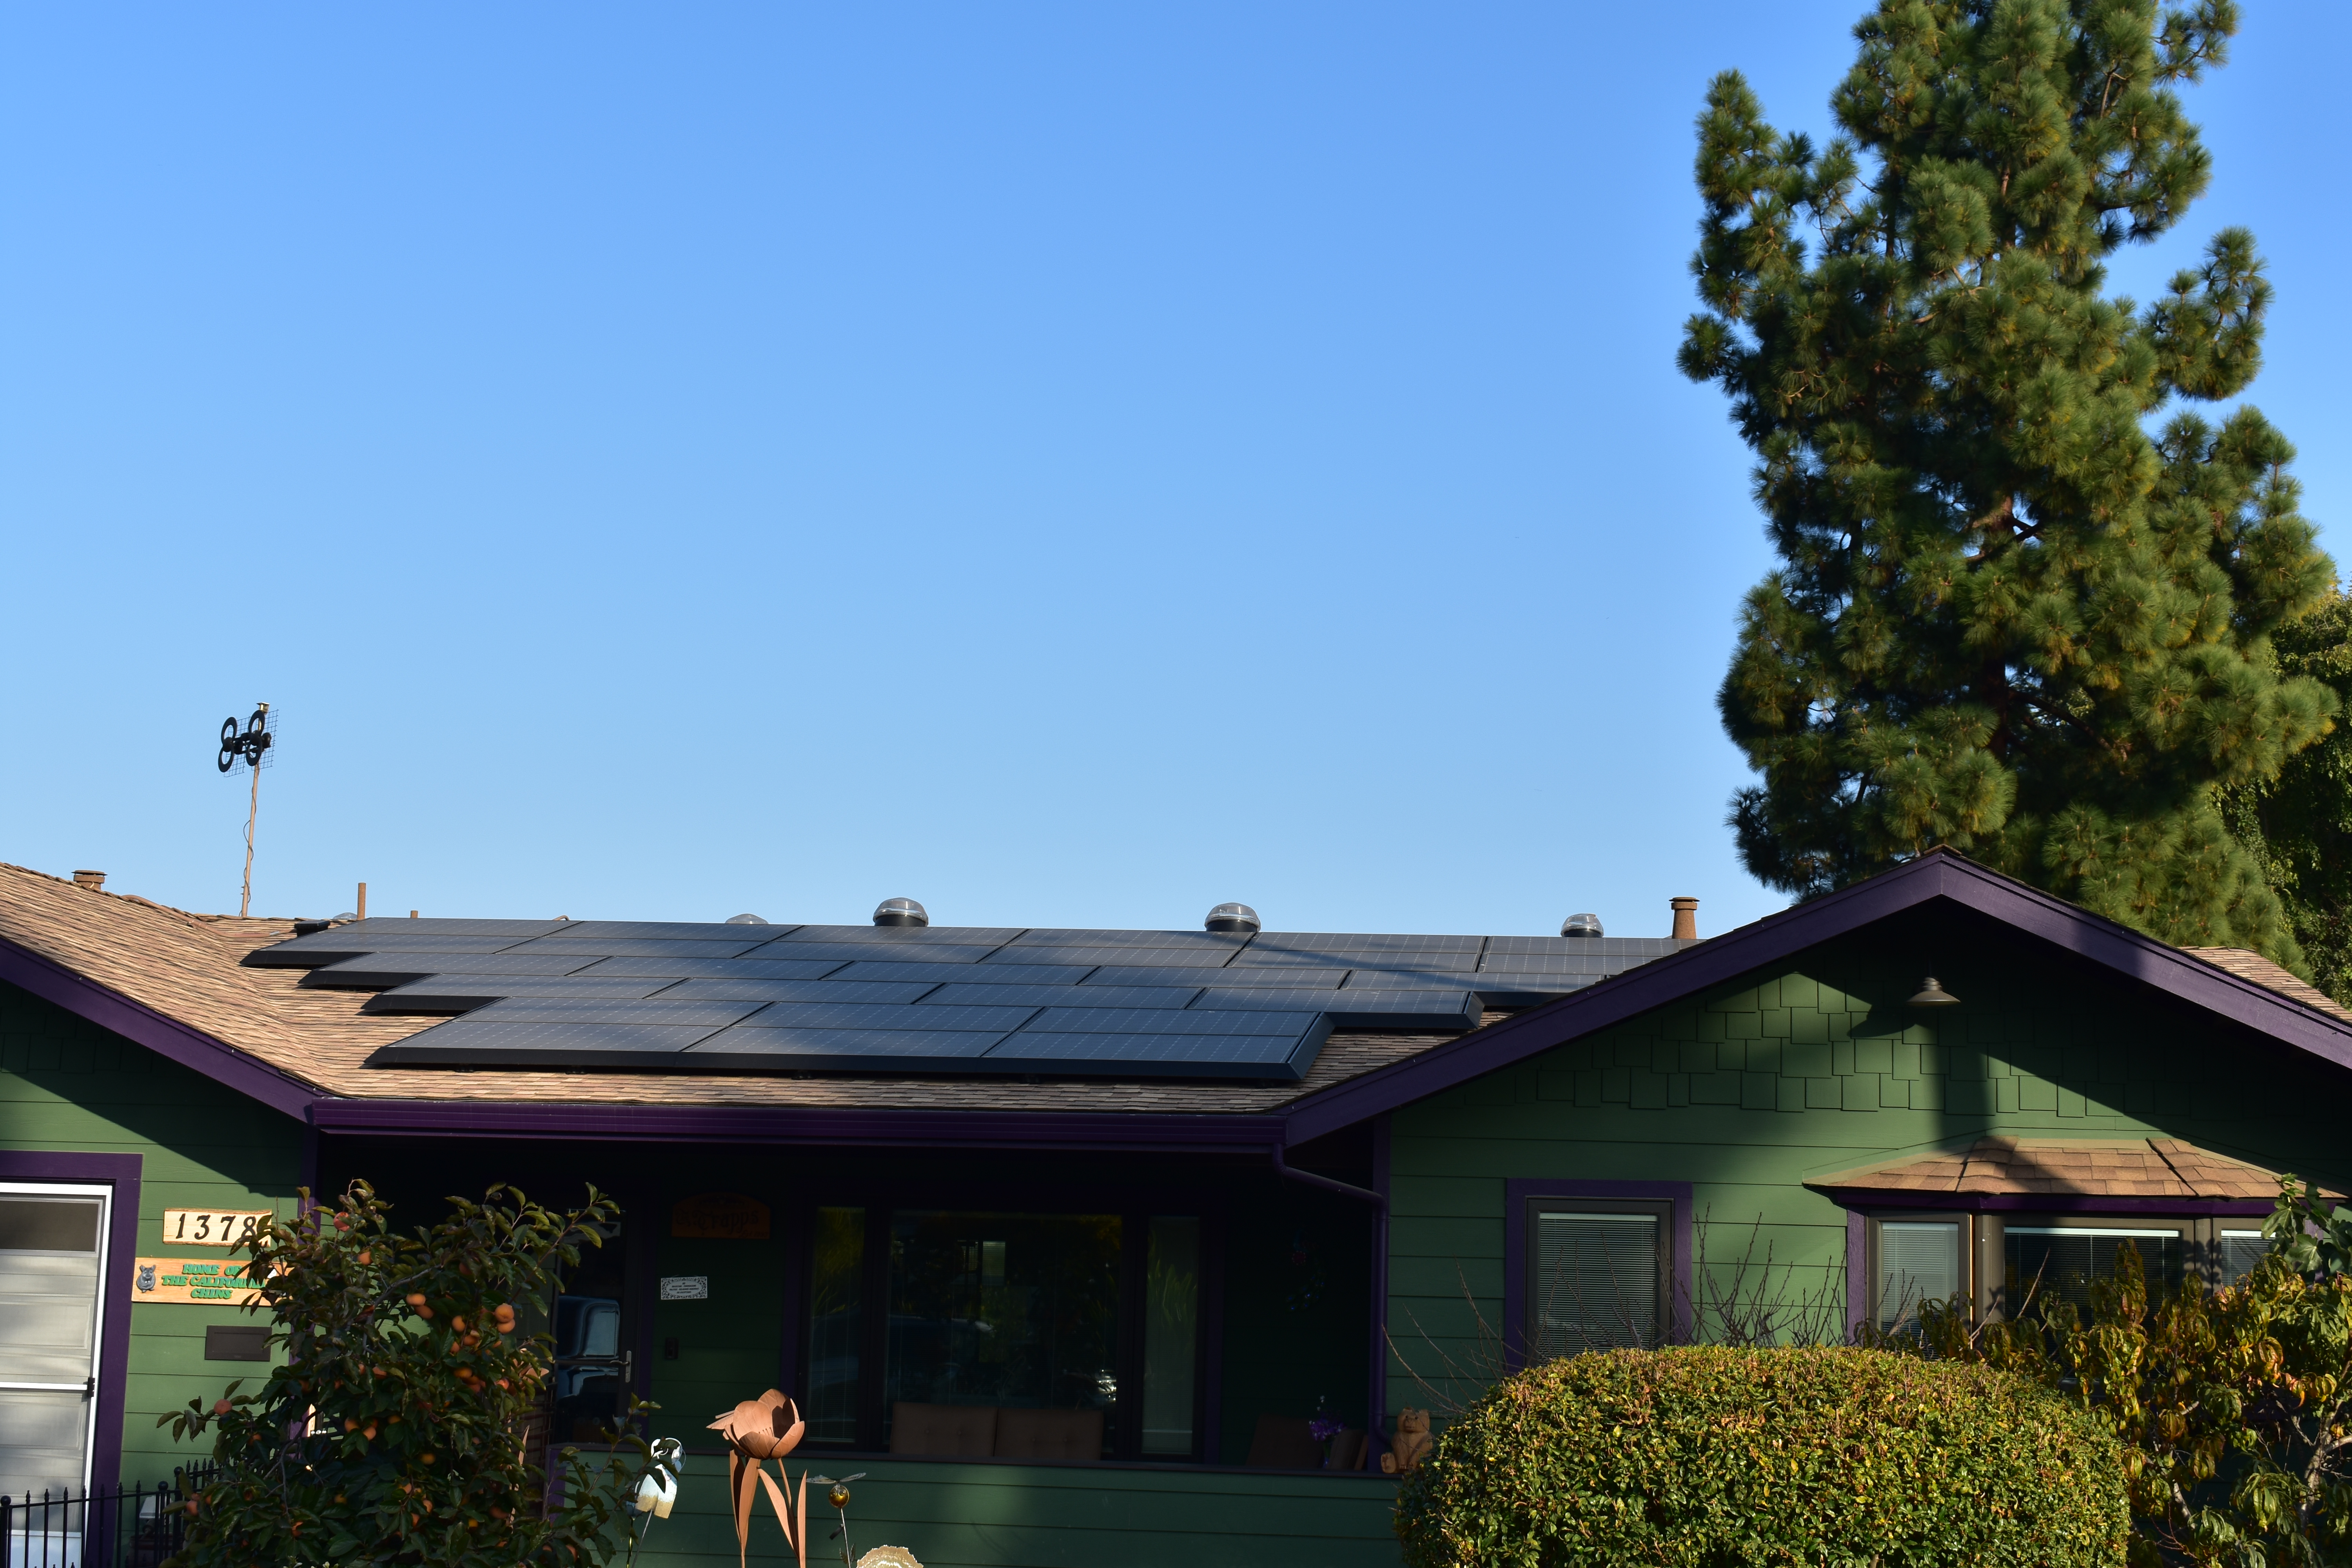 solar panels on the roof of a home